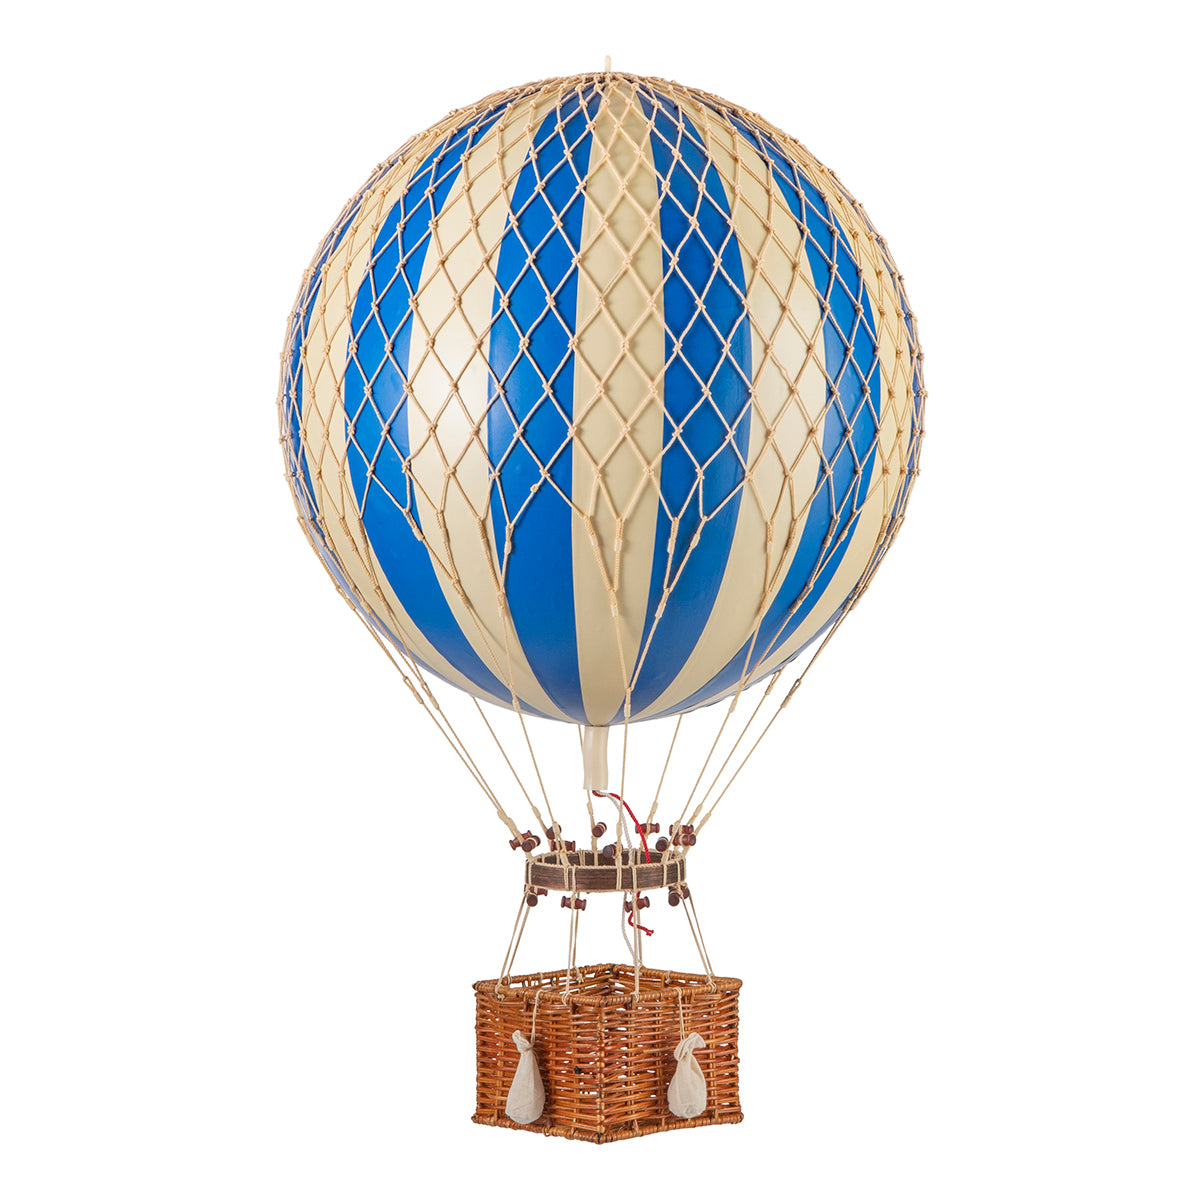 A blue and white Wonderen Large Hot Air Balloon - Jules Verne decoration on a white background.